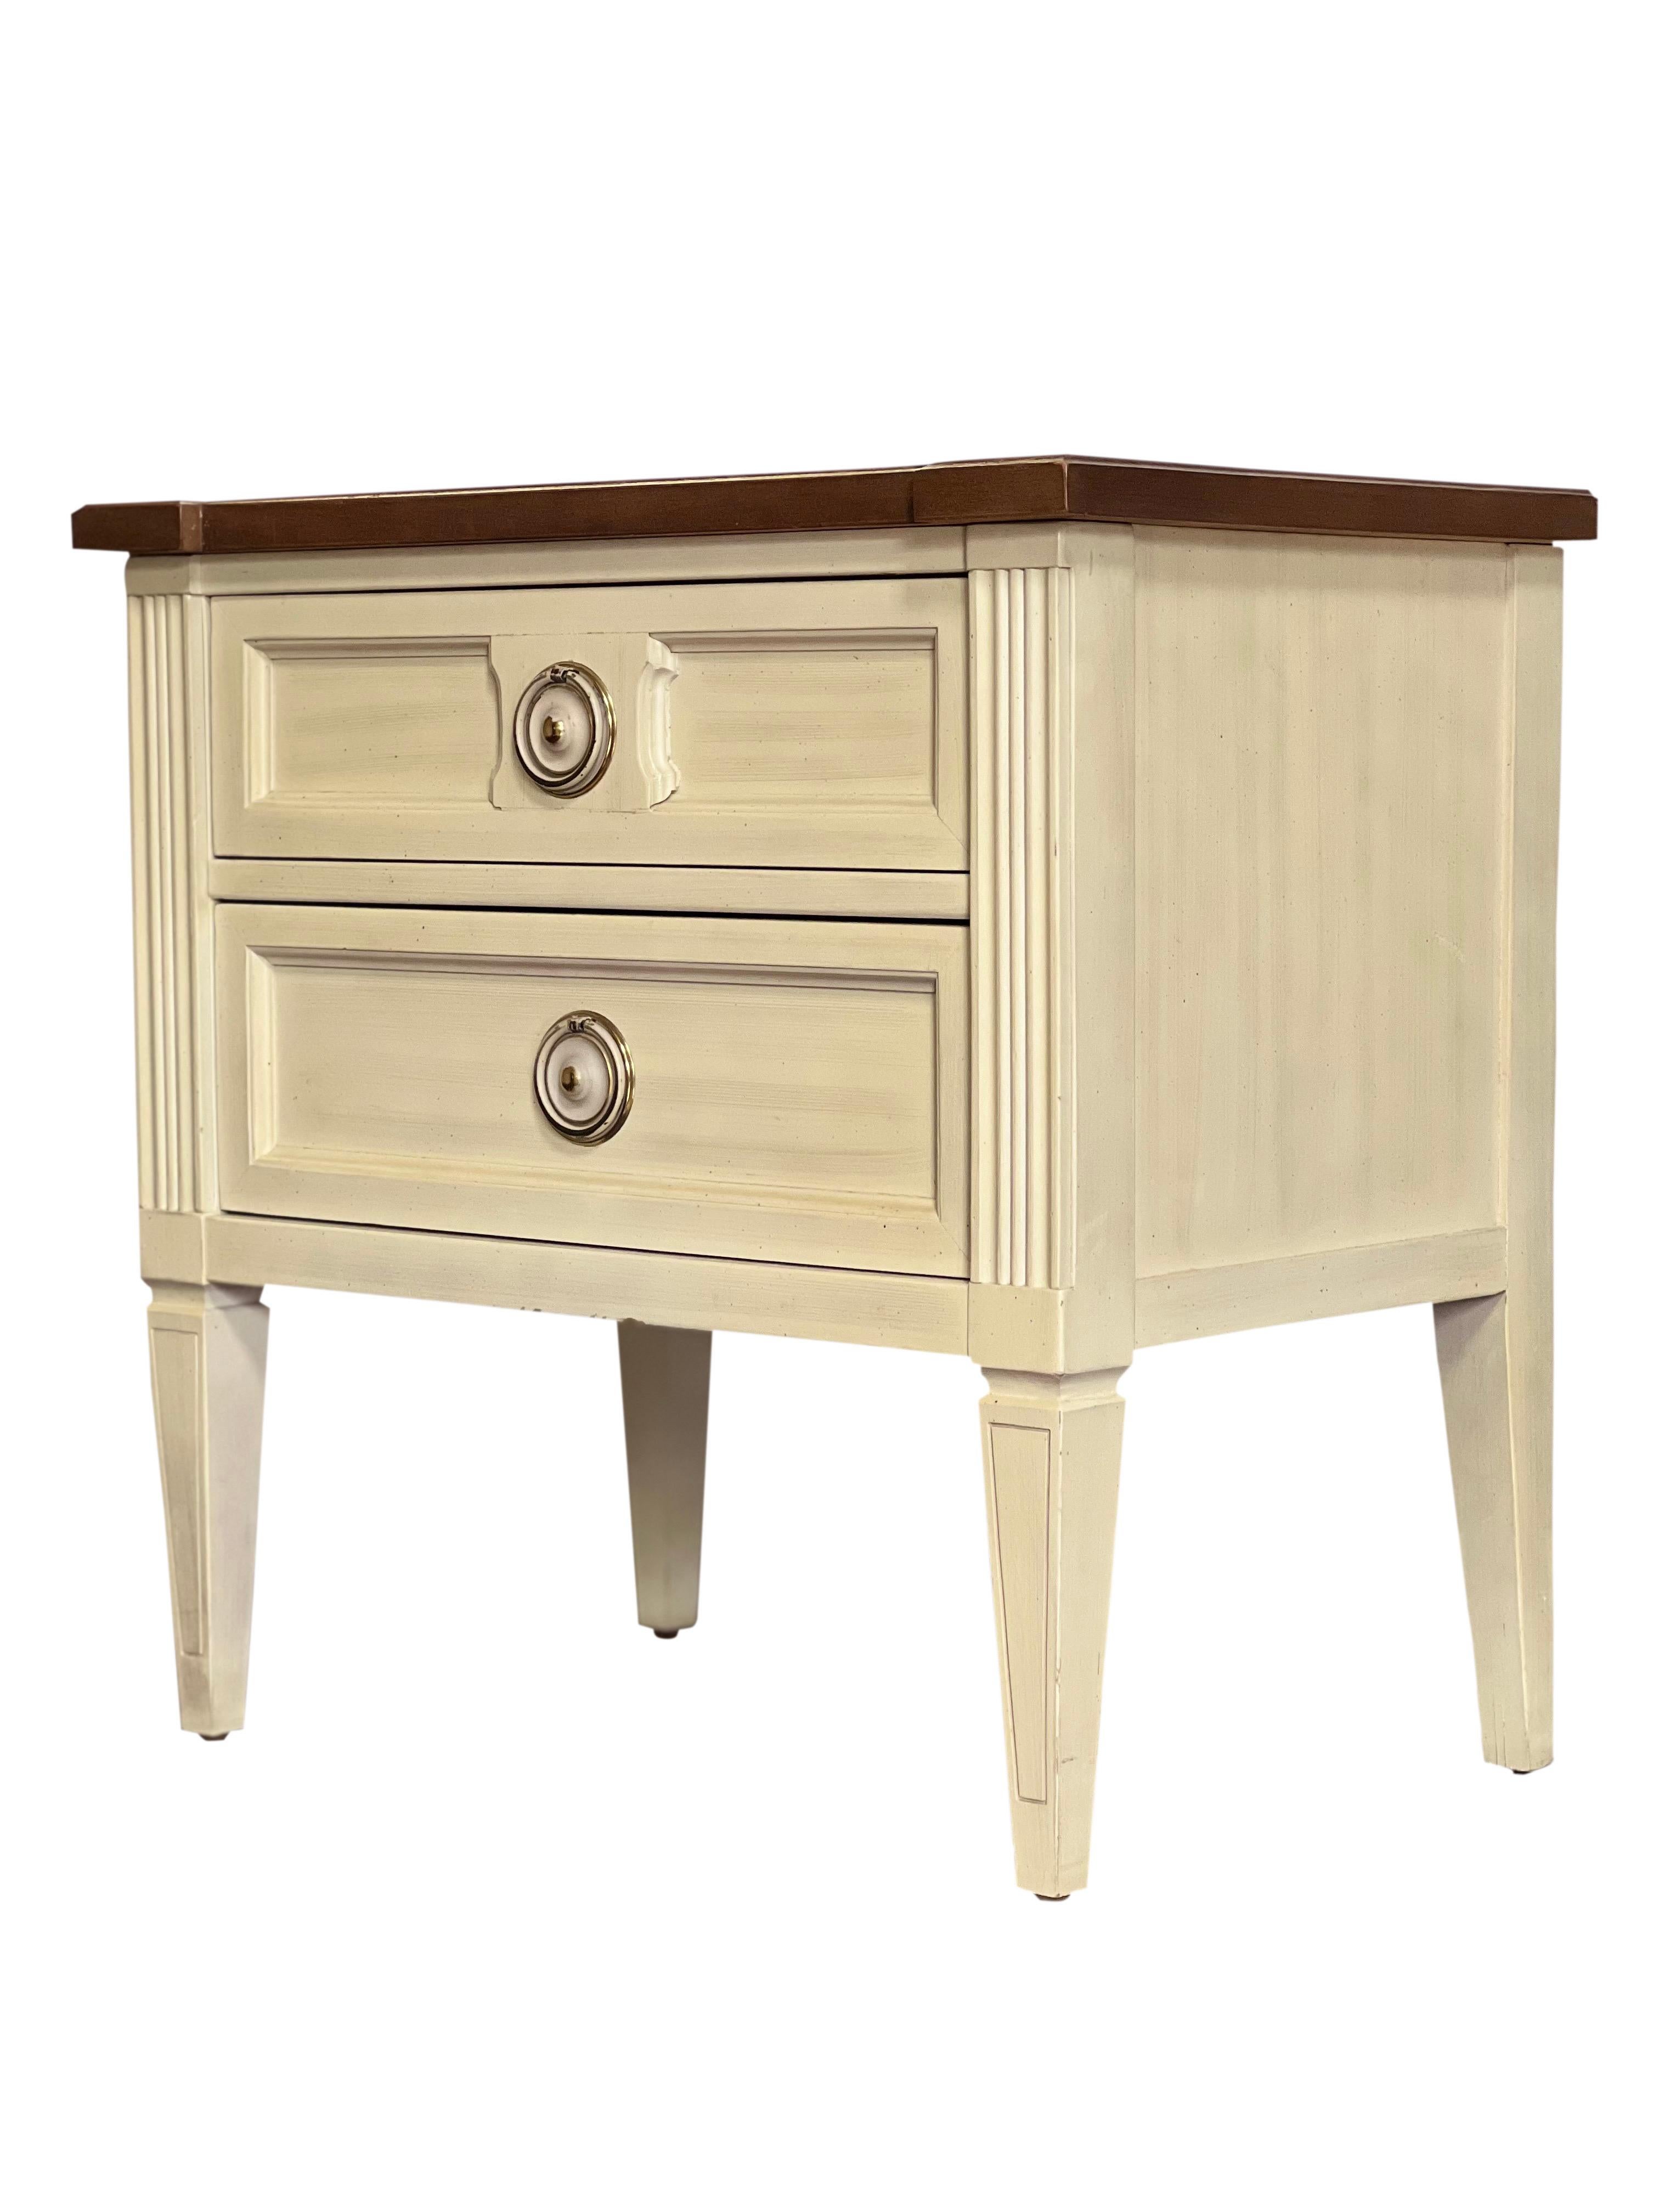 20th Century American of Martinsville Parquet Top White Nightstands, a Pair For Sale